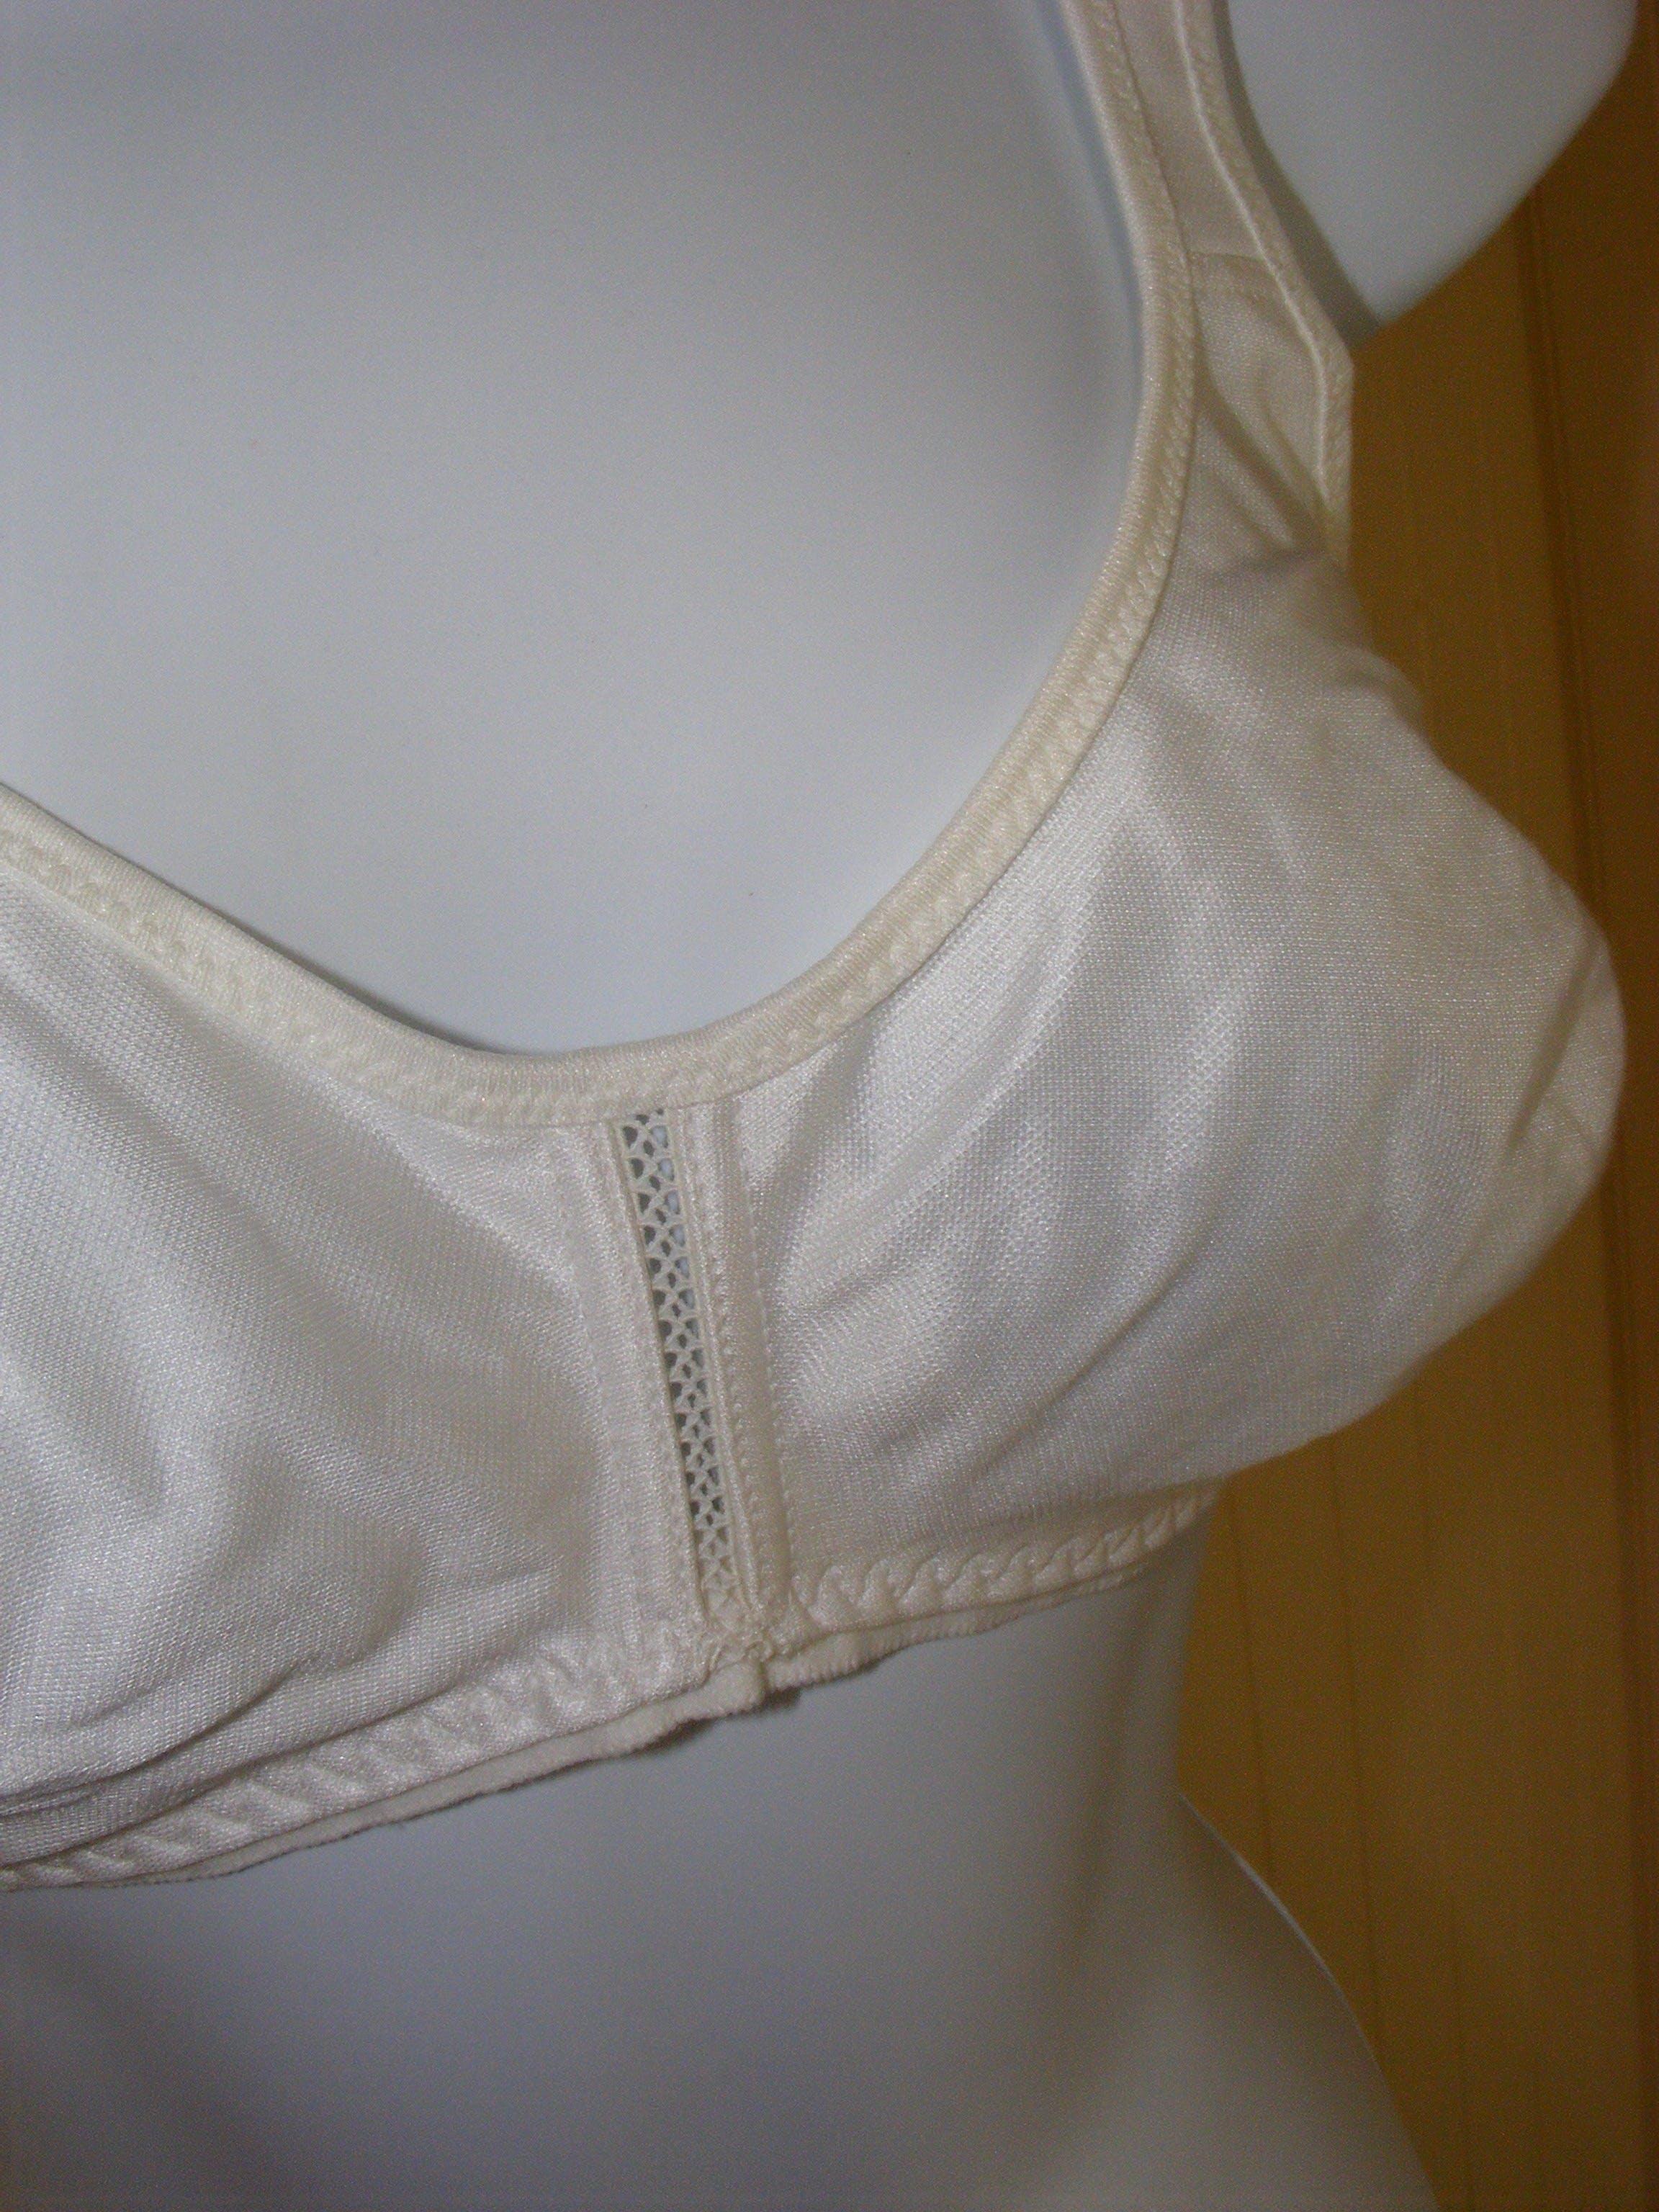 Vintage 80s Bra 38a White Soft Cup Deadstock By Sears, Shop THRILLING